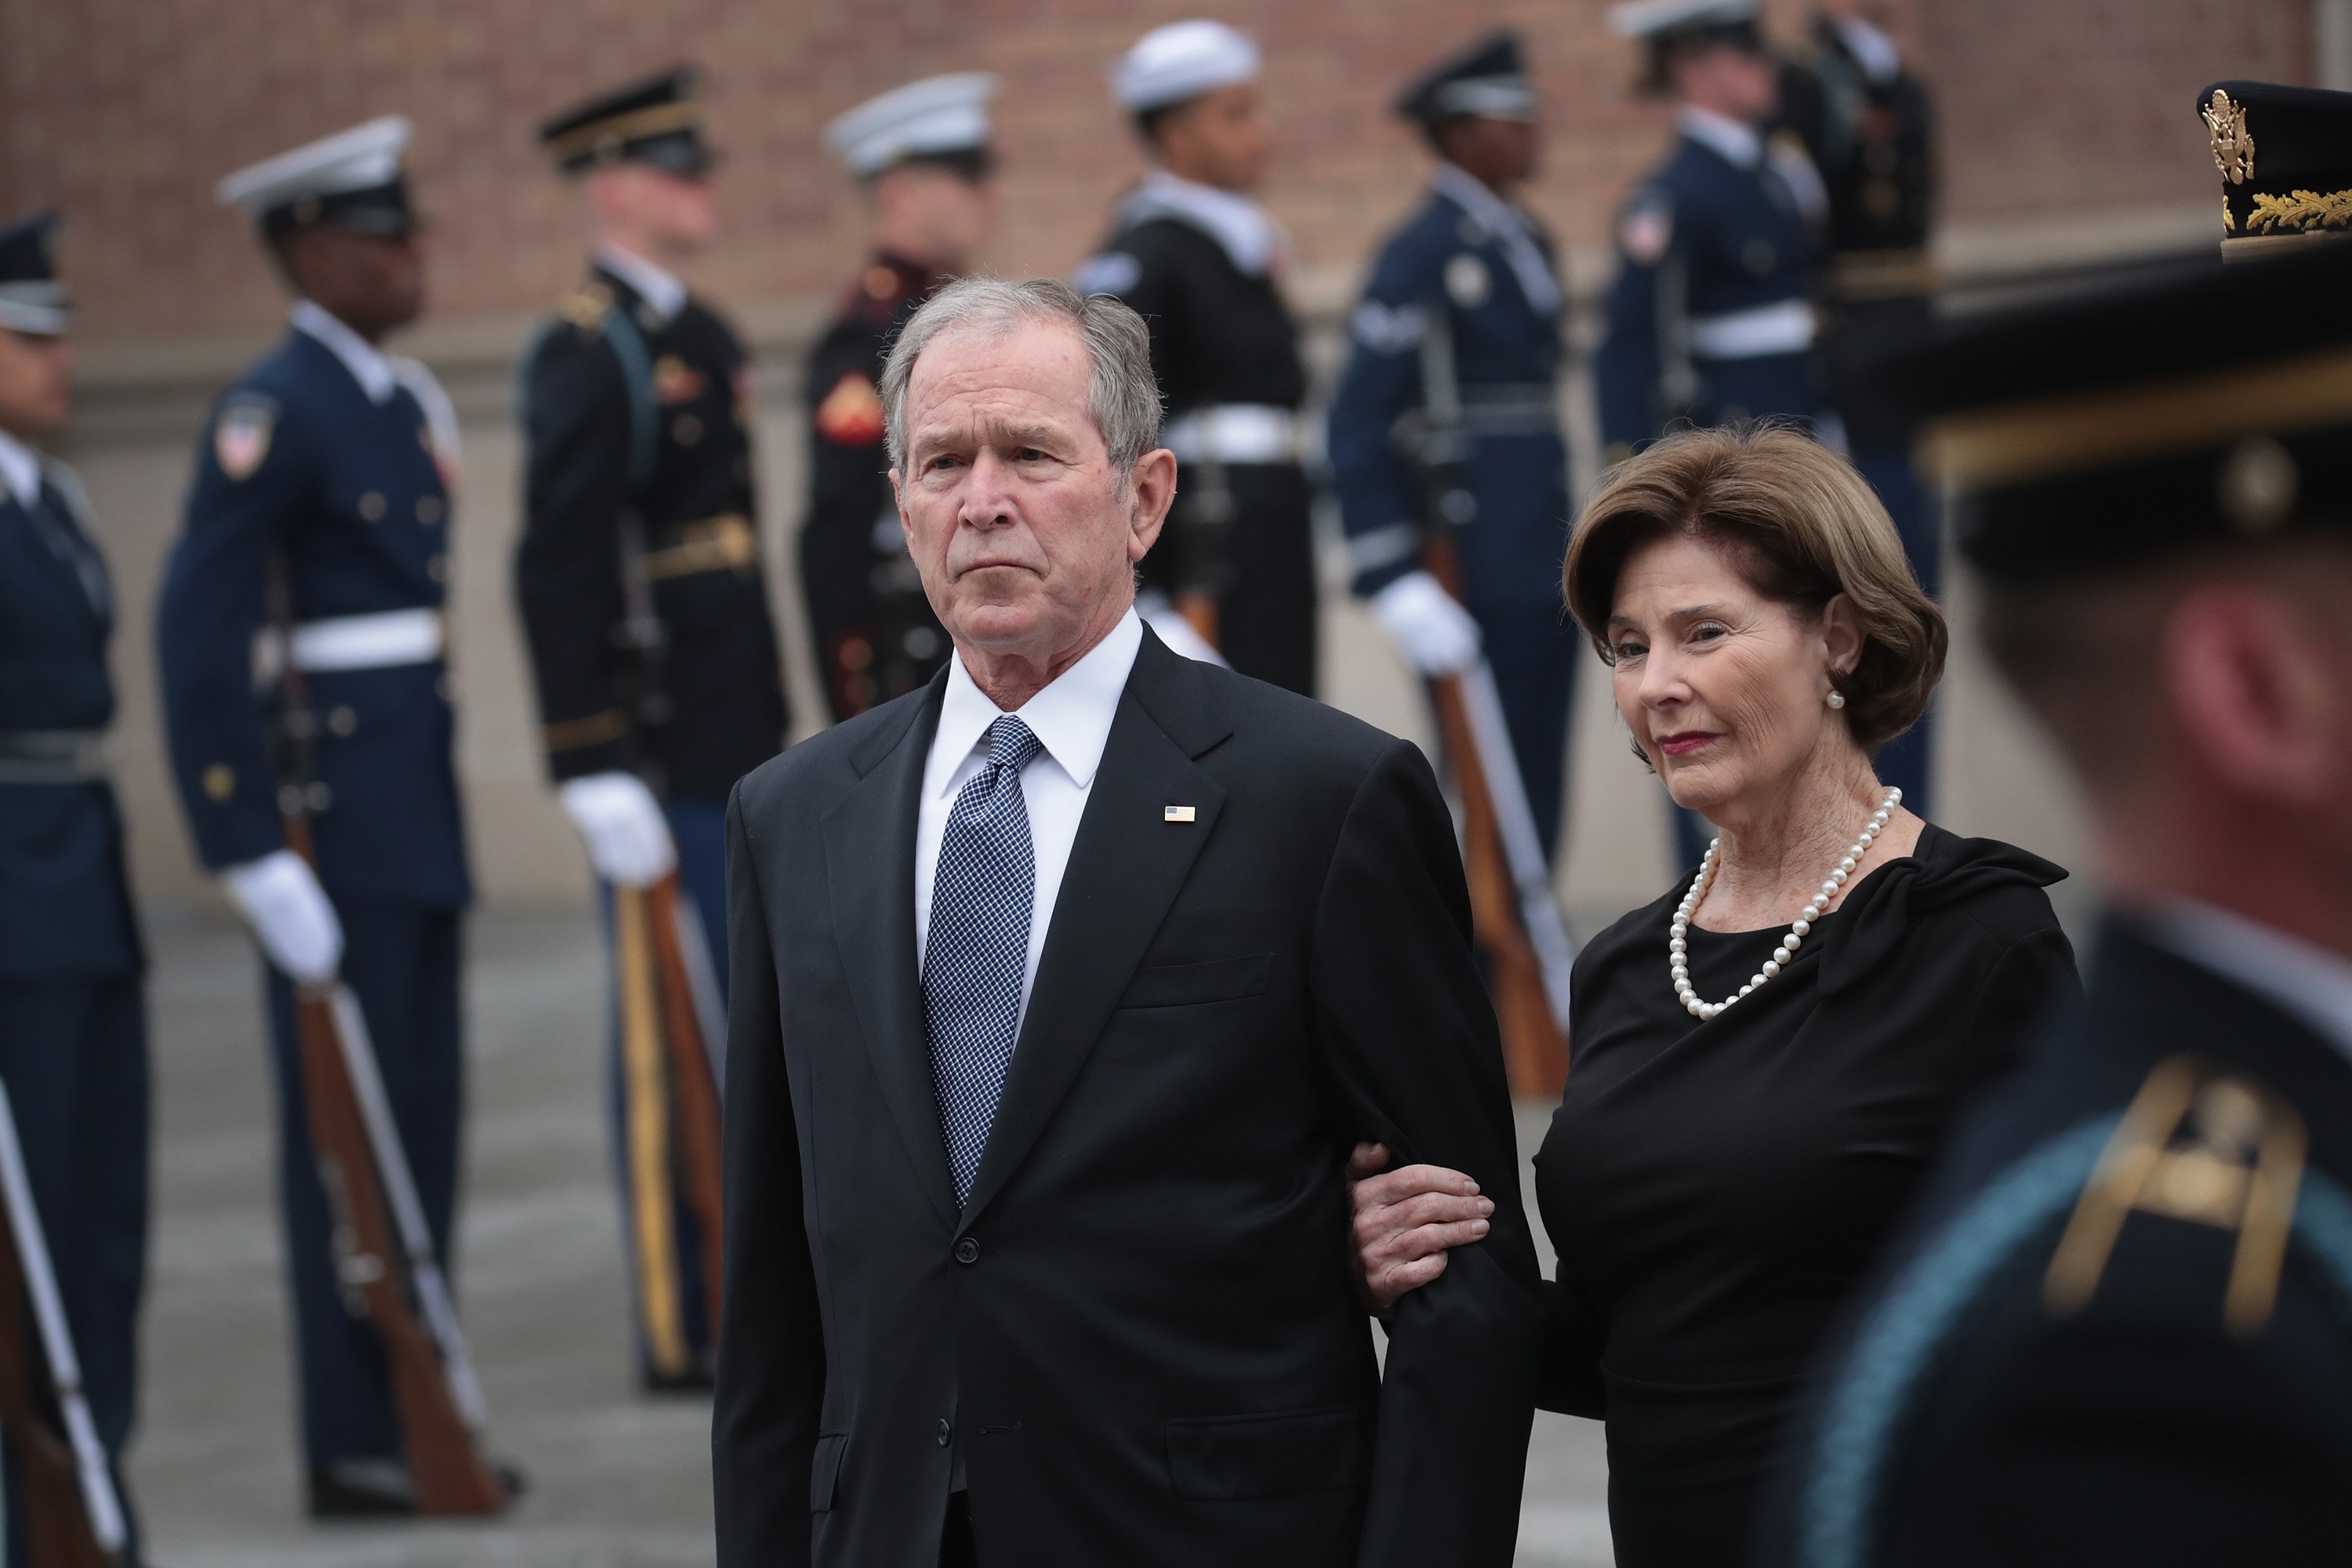 Former President George W. Bush and his wife Laura watch as the honor guard passes after loading the casket of President George H.W. Bush into a hearse outside St. Martin's Episcopal Church following his funeral service December 6, 2018 in Houston, Texas. (Scott Olson/Getty Images)